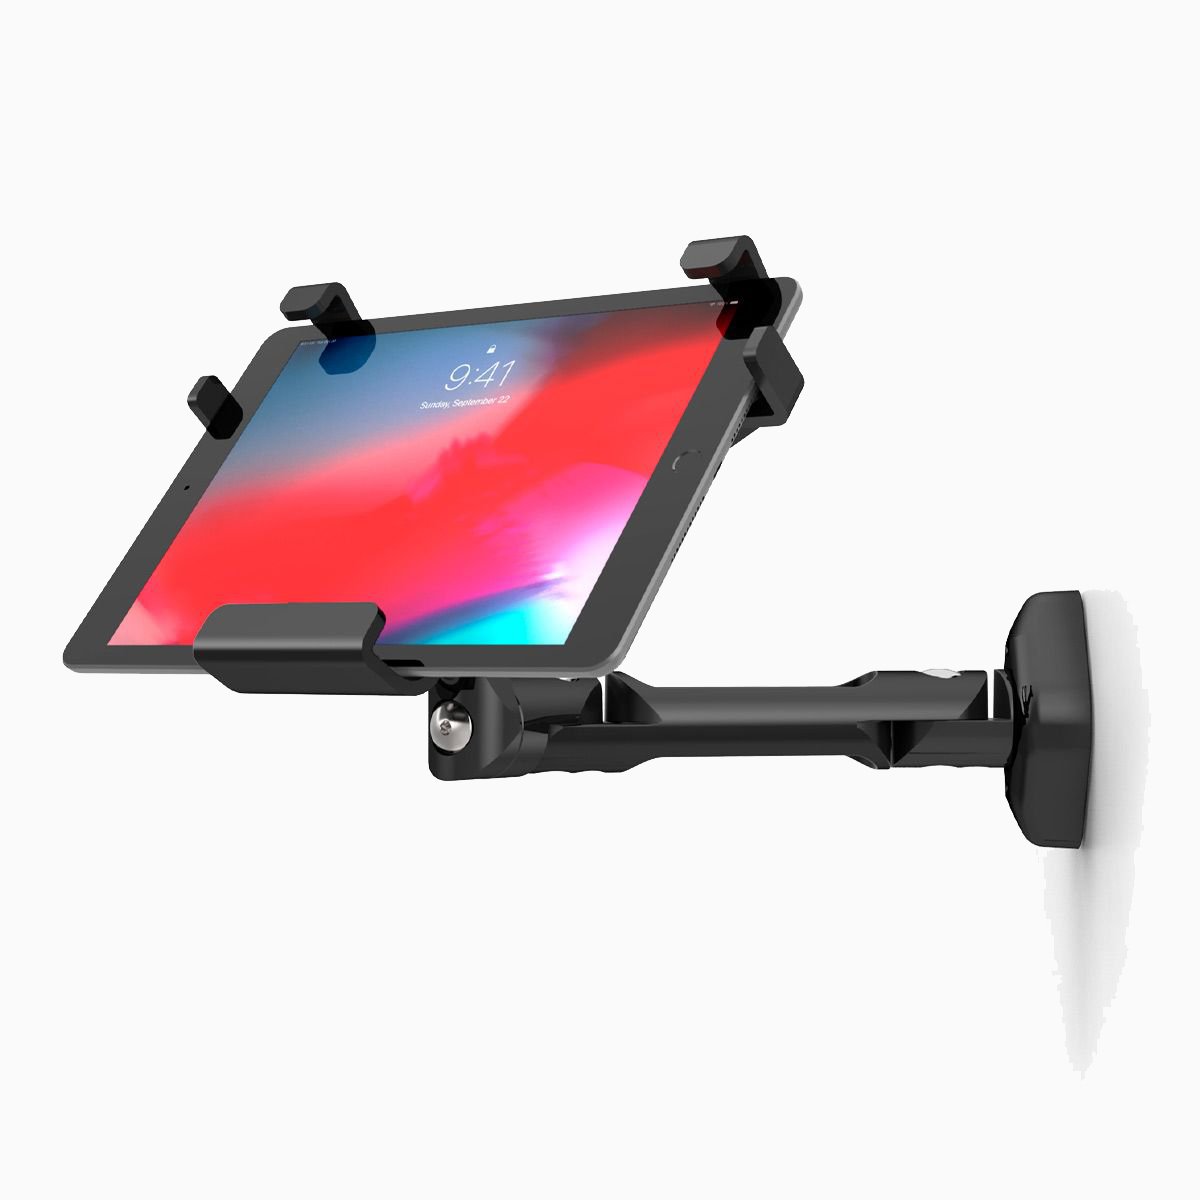 Maclocks Tablet Rugged Cases Locking Stand